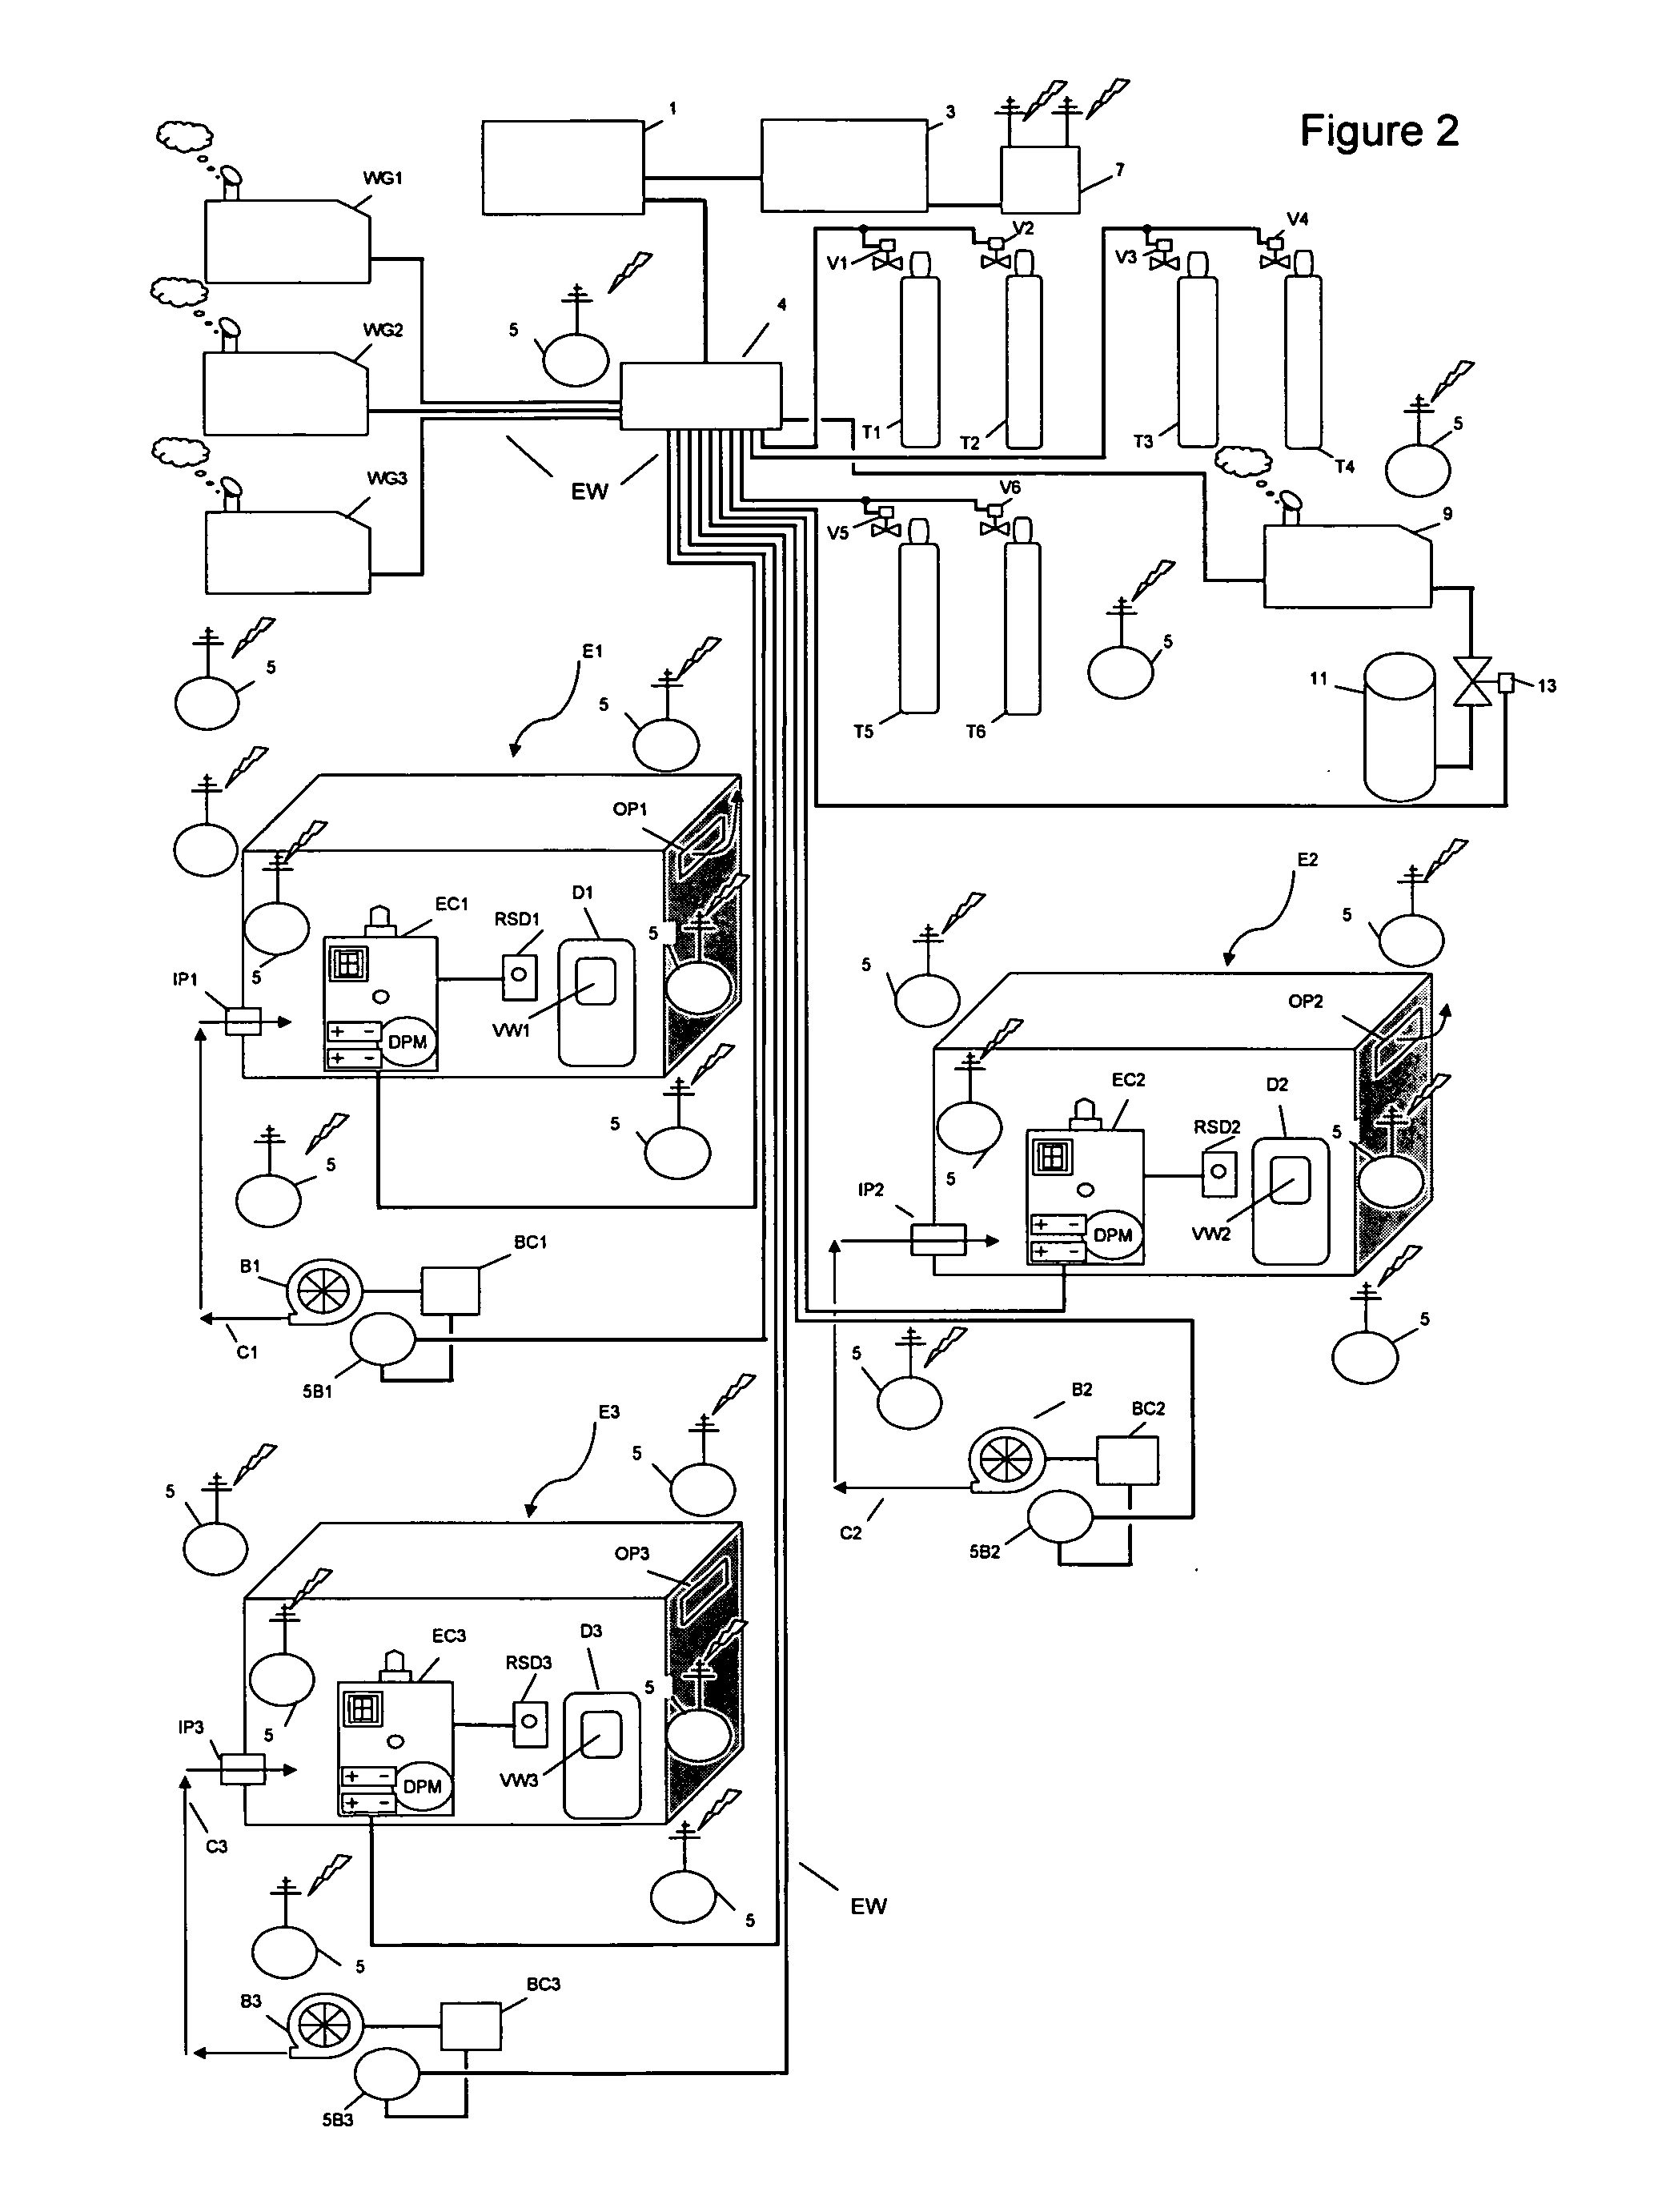 Enclosure system for hot work within the vicinity of flammable or combustible material